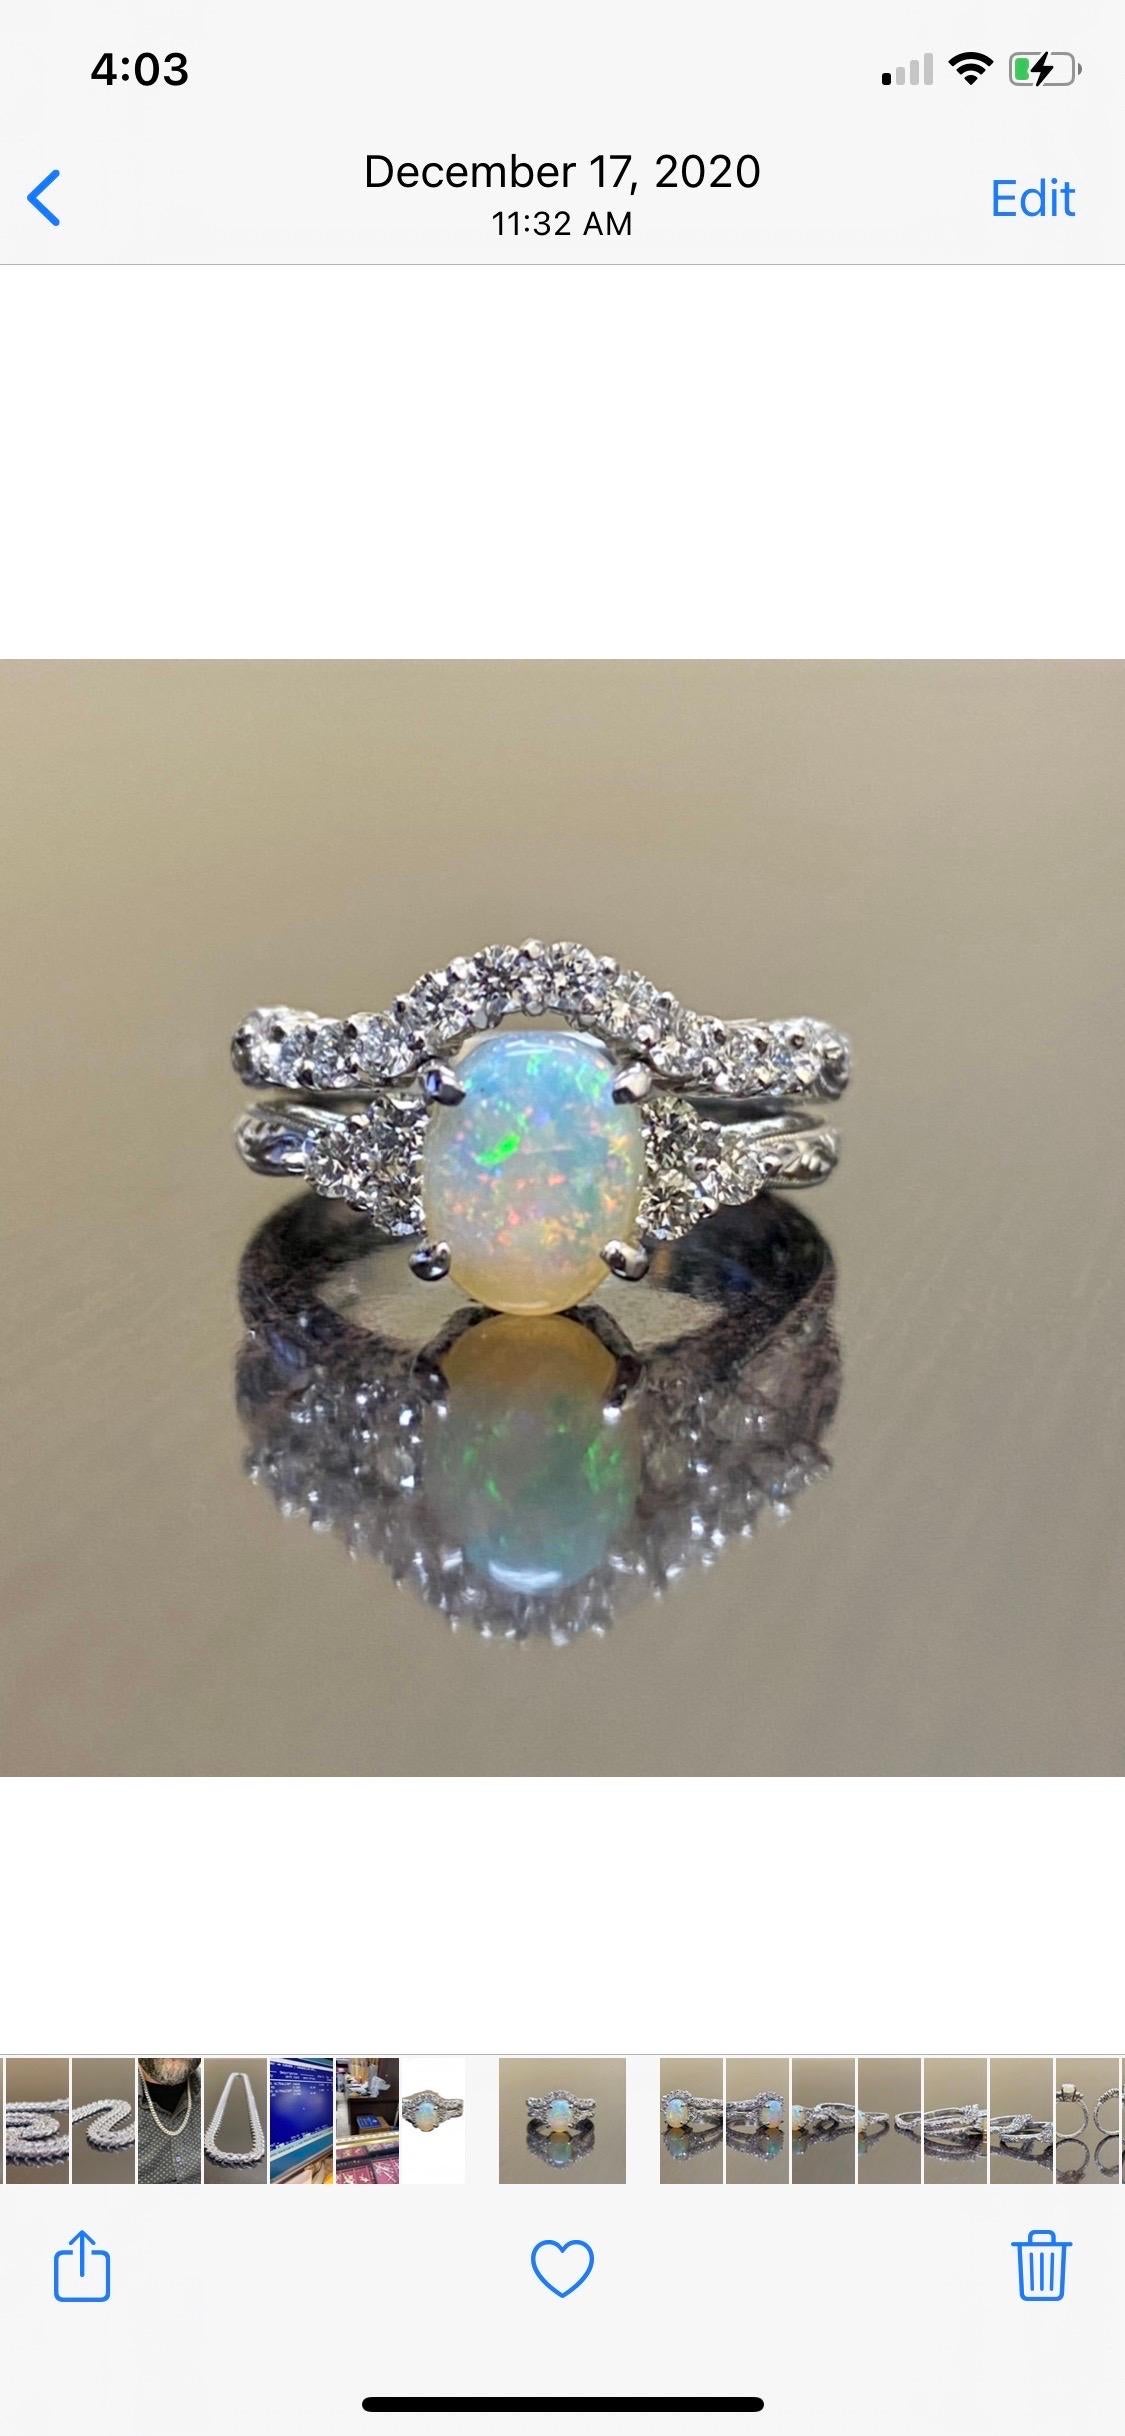 DeKara Designs Collection

Our latest design! An elegant and lustrous Opal cabochon and diamond platinum engagement ring with matching band.

Metal- 18K White Gold, .750.

Stones- Engagement Ring Center Genuine Australian Oval Opal 8 x 6 MM, 6 Round